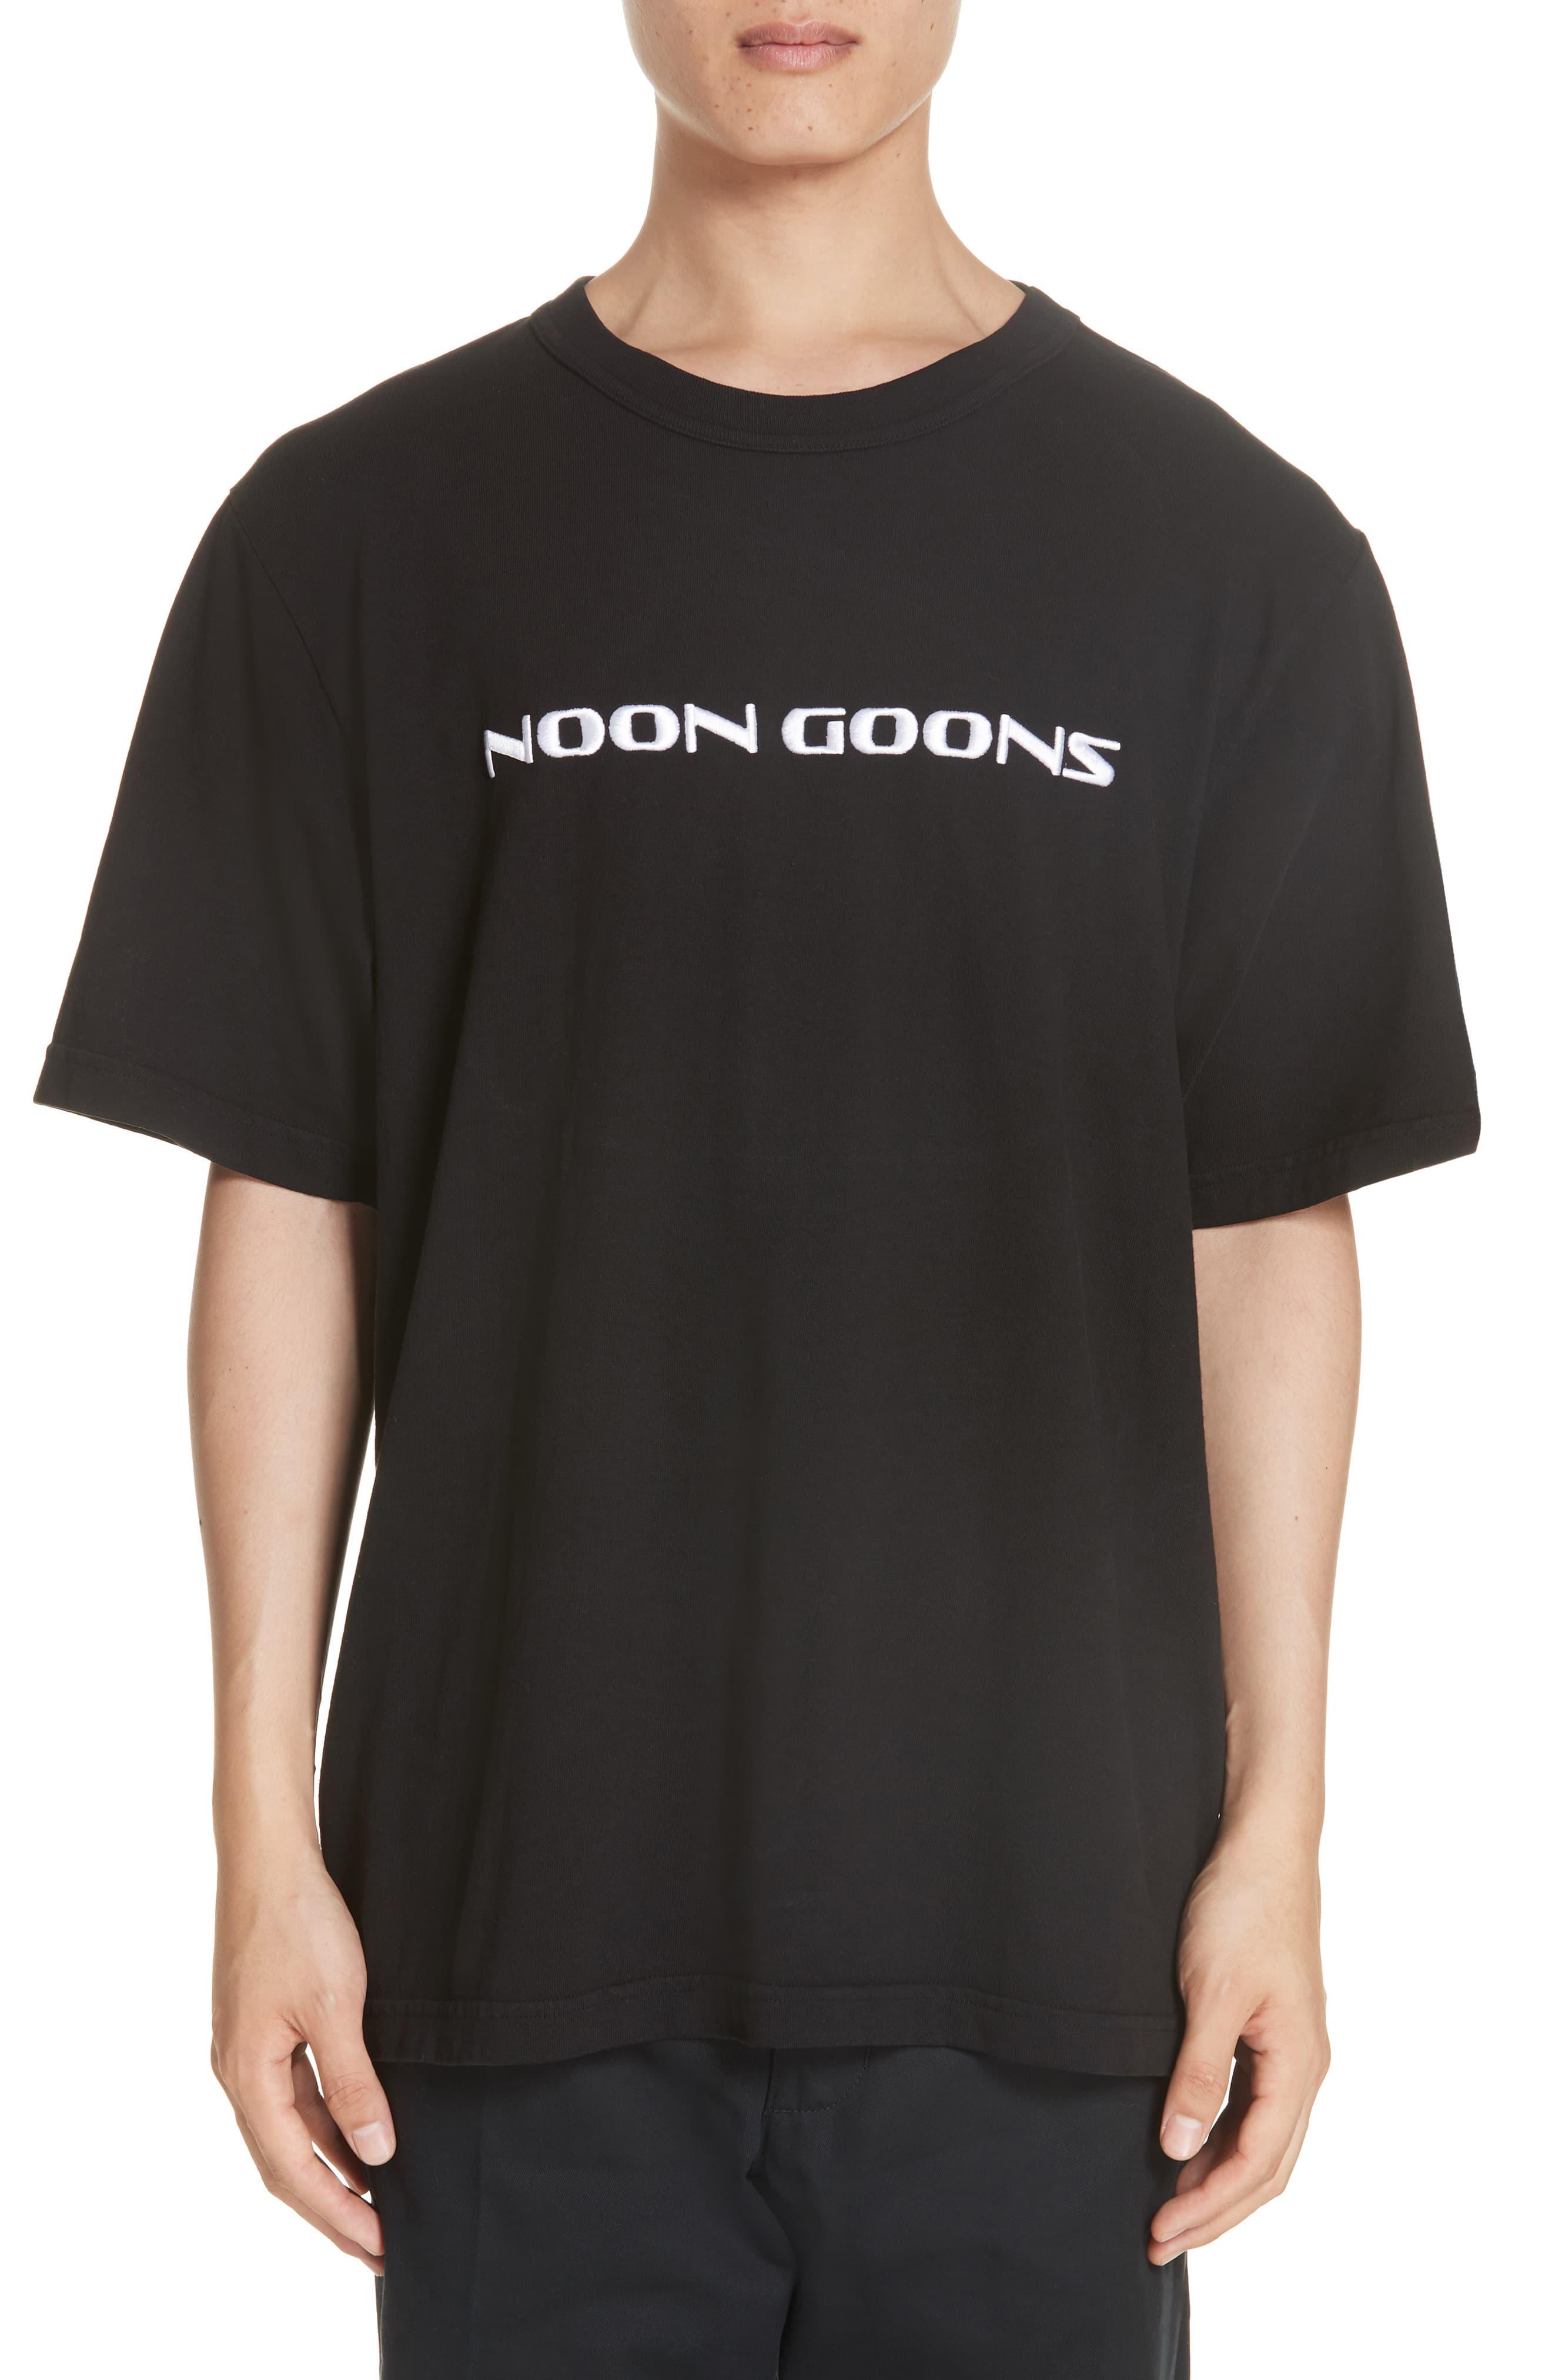 Noon Goons Embroidered Logo T-shirt in Black for Men - Lyst